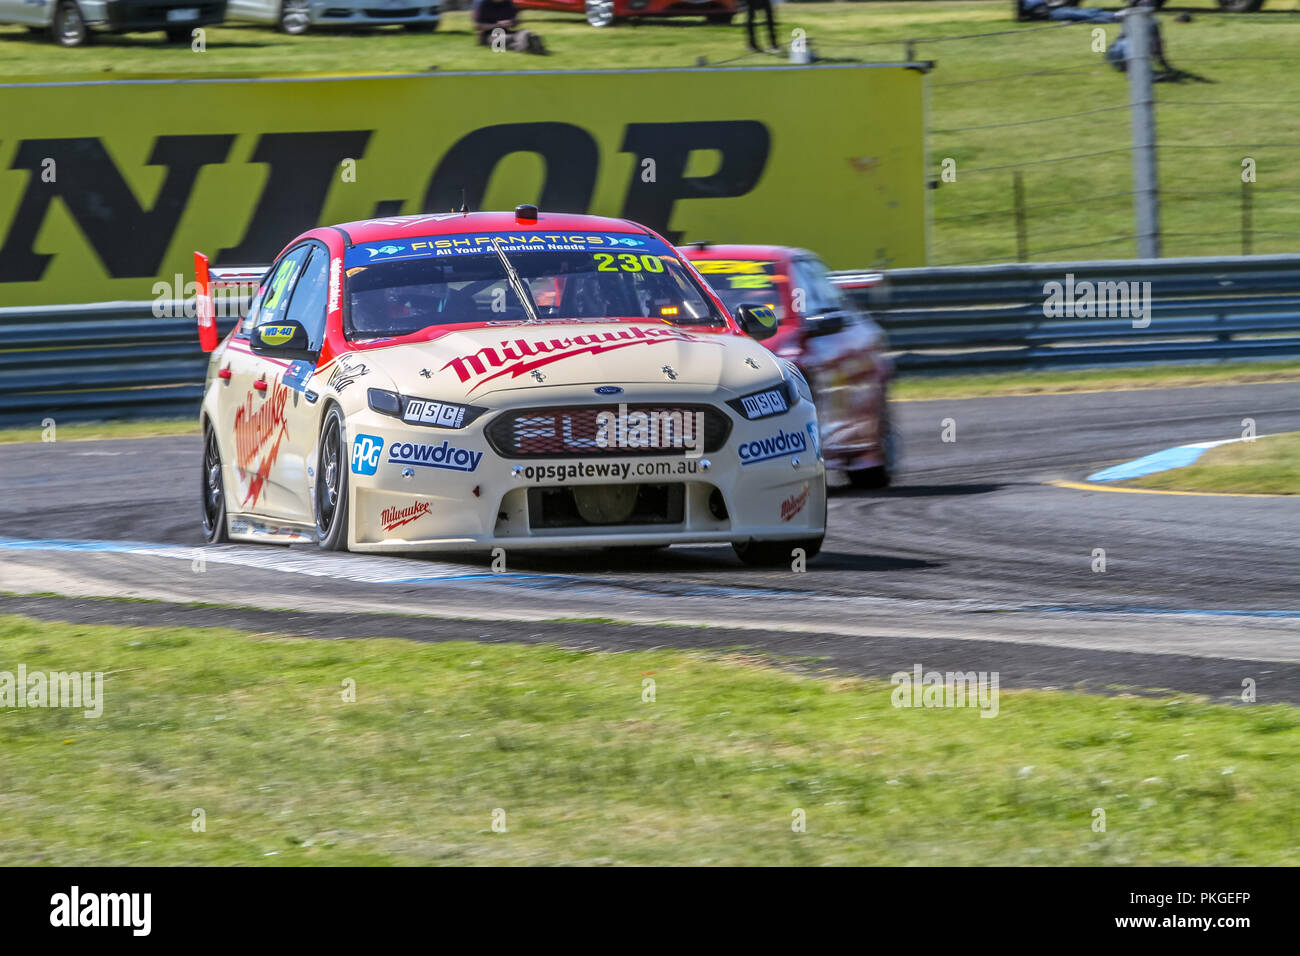 Ford Falcon V8 Supercar High Resolution Stock Photography And Images Alamy